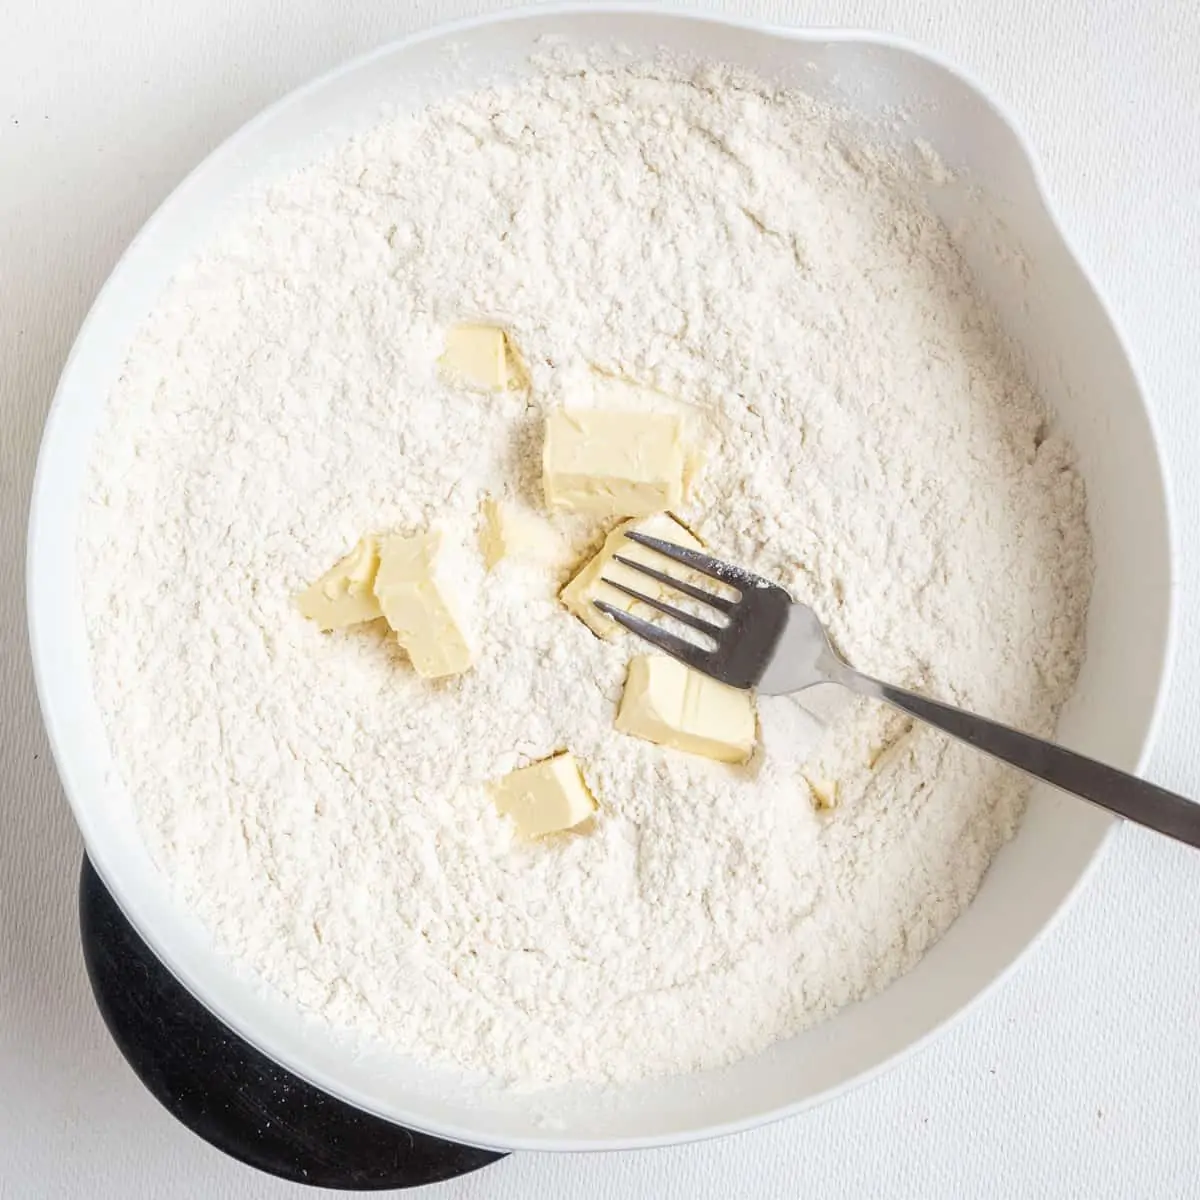 cubes of butter in a dry floury mix of ingredients in a mixing bowl.